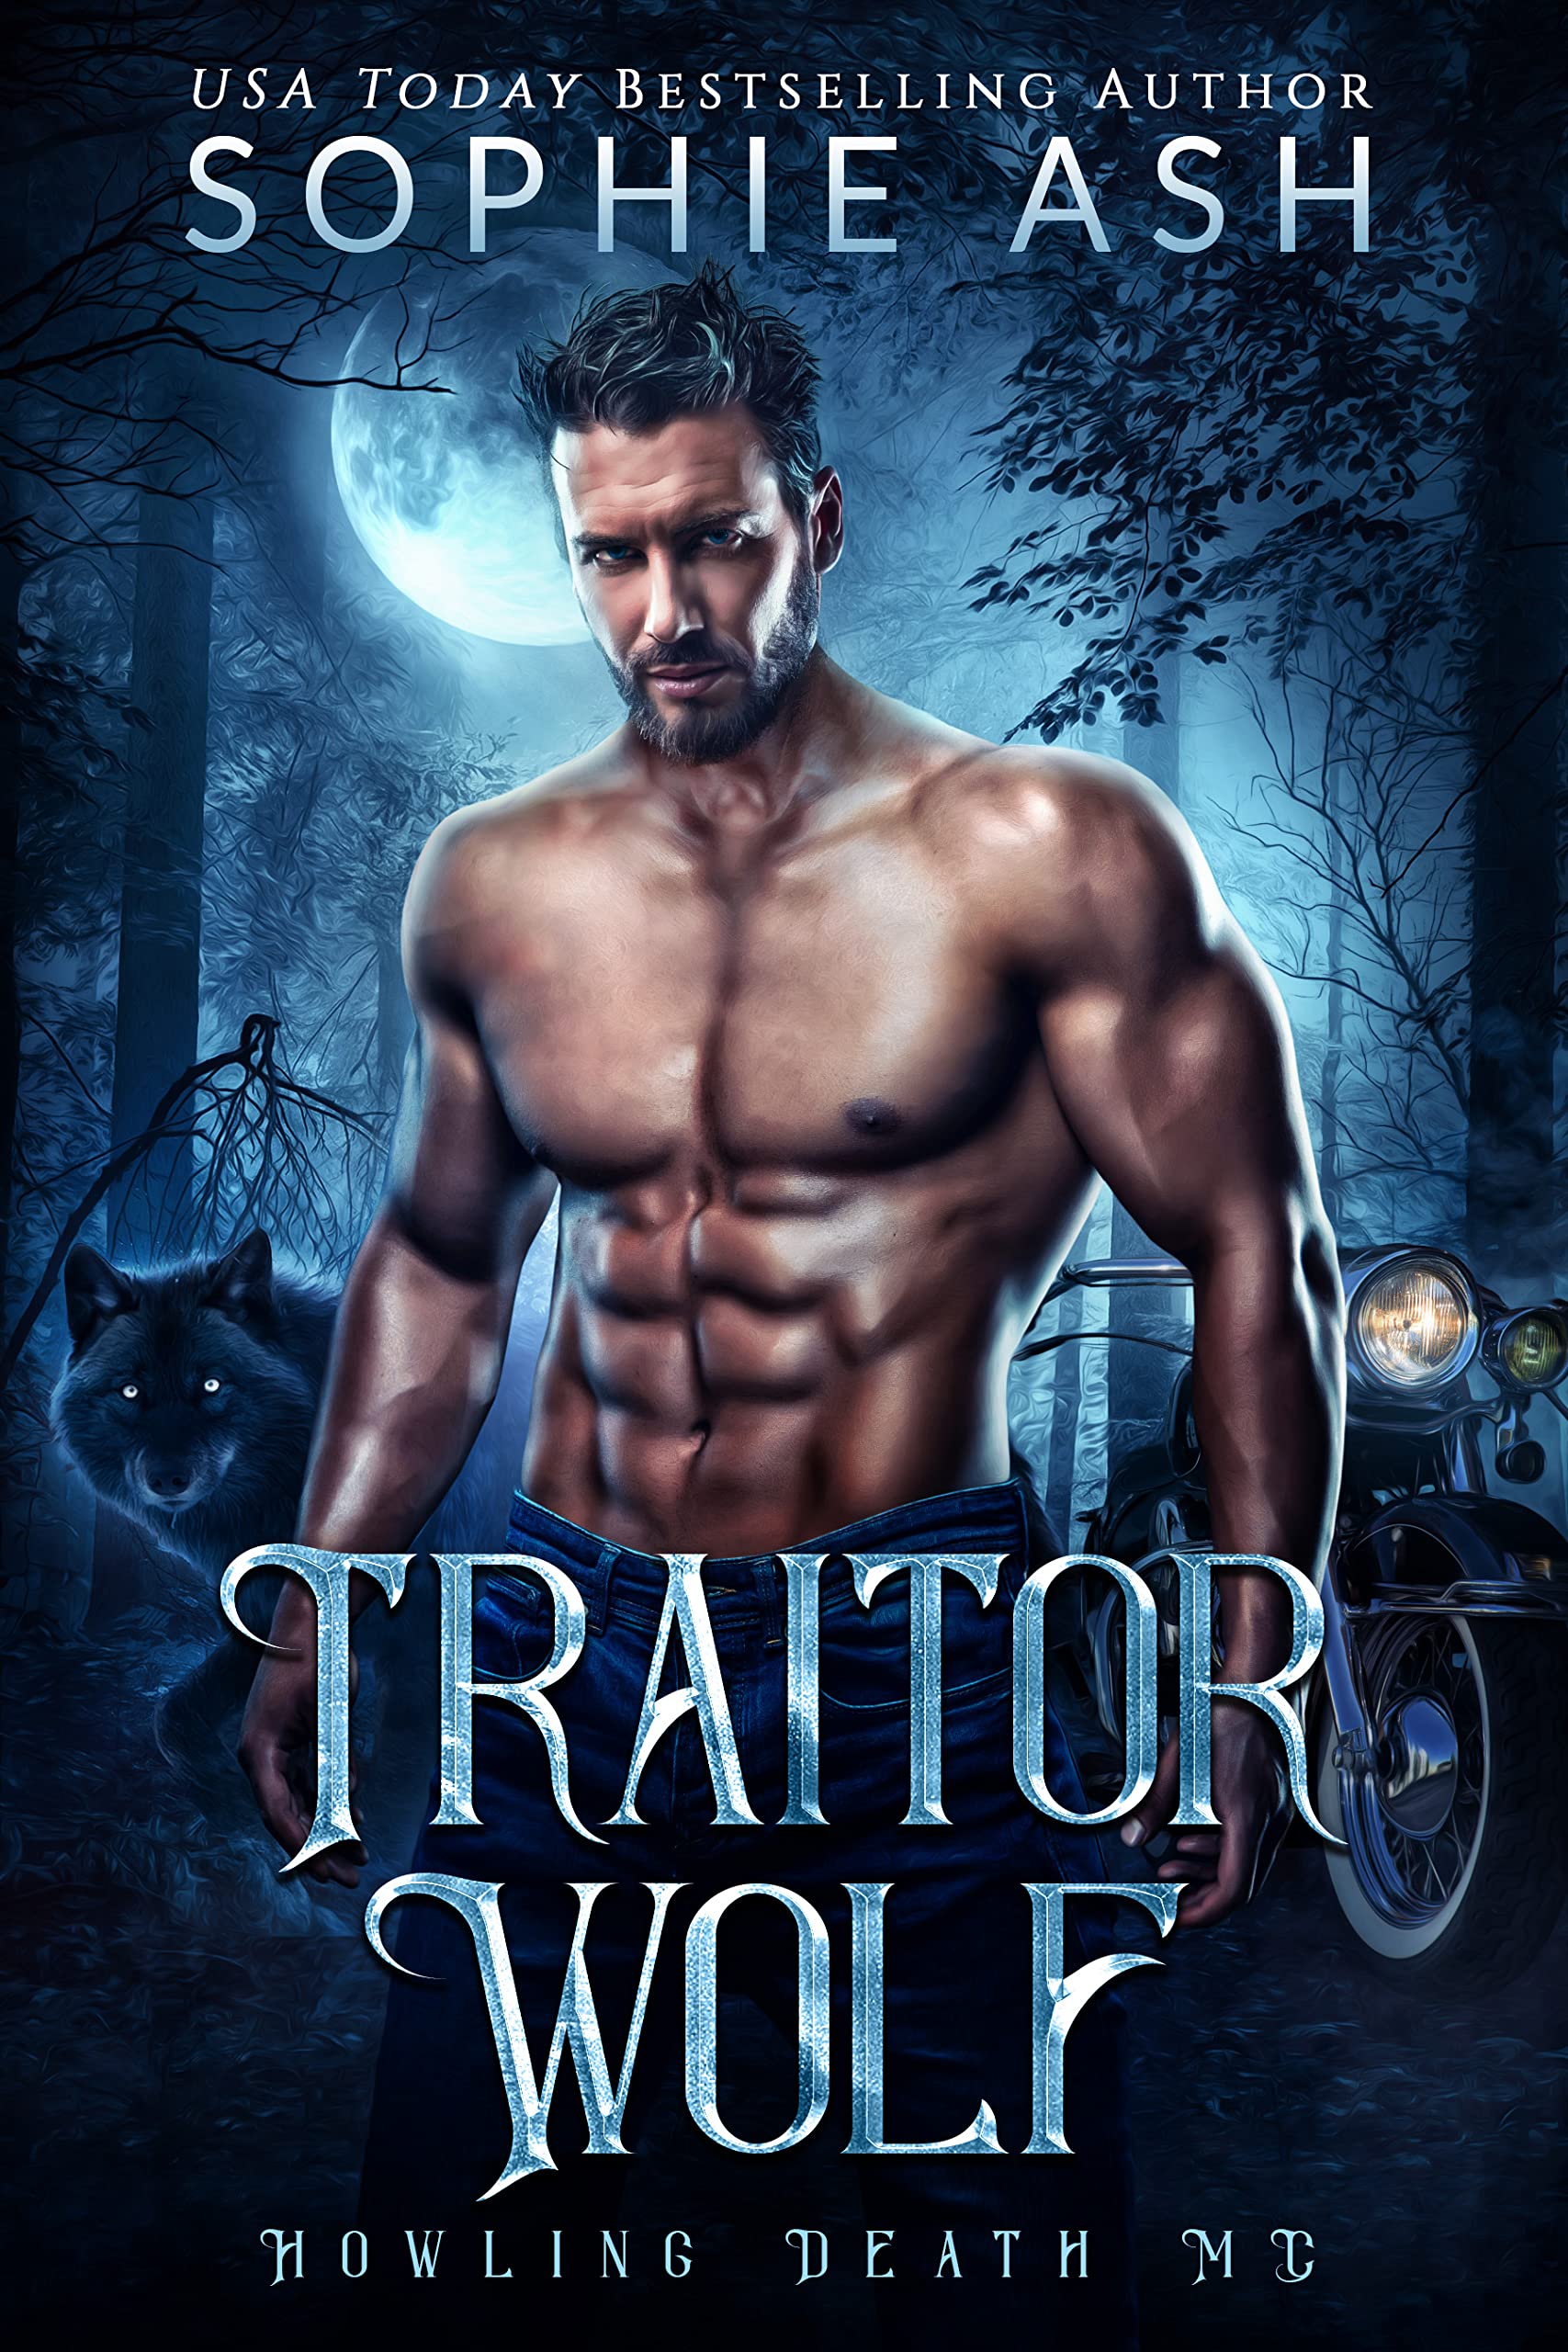 Traitor Wolf by Sophie Ash PDF Download